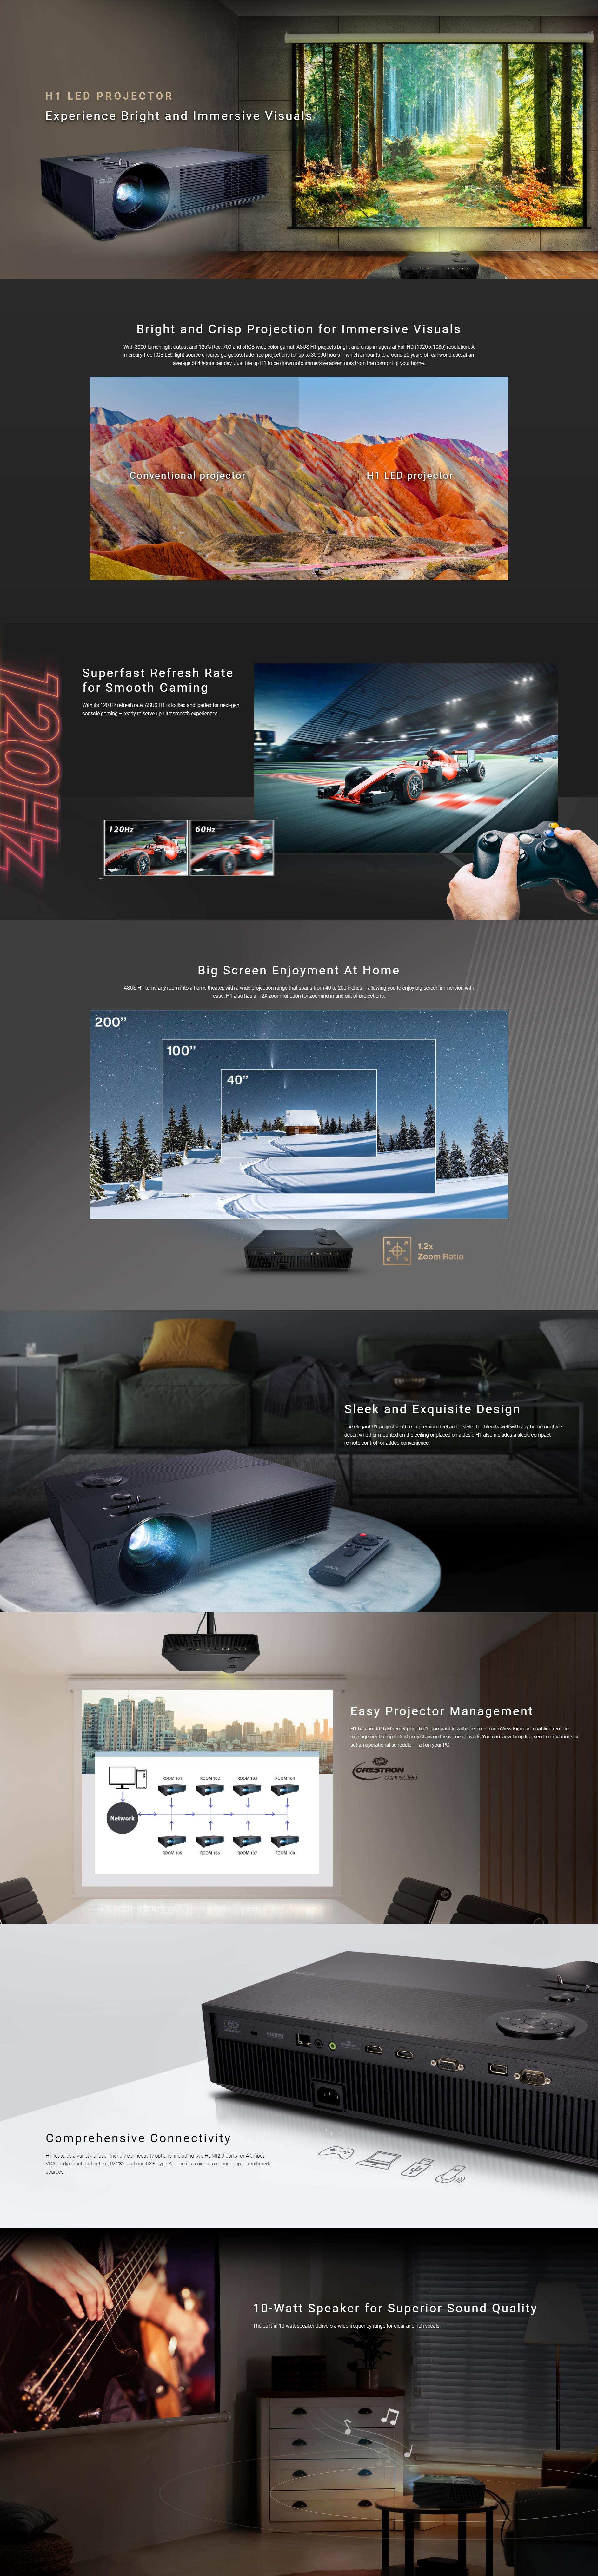 A large marketing image providing additional information about the product Asus H1 LED Projector - Additional alt info not provided